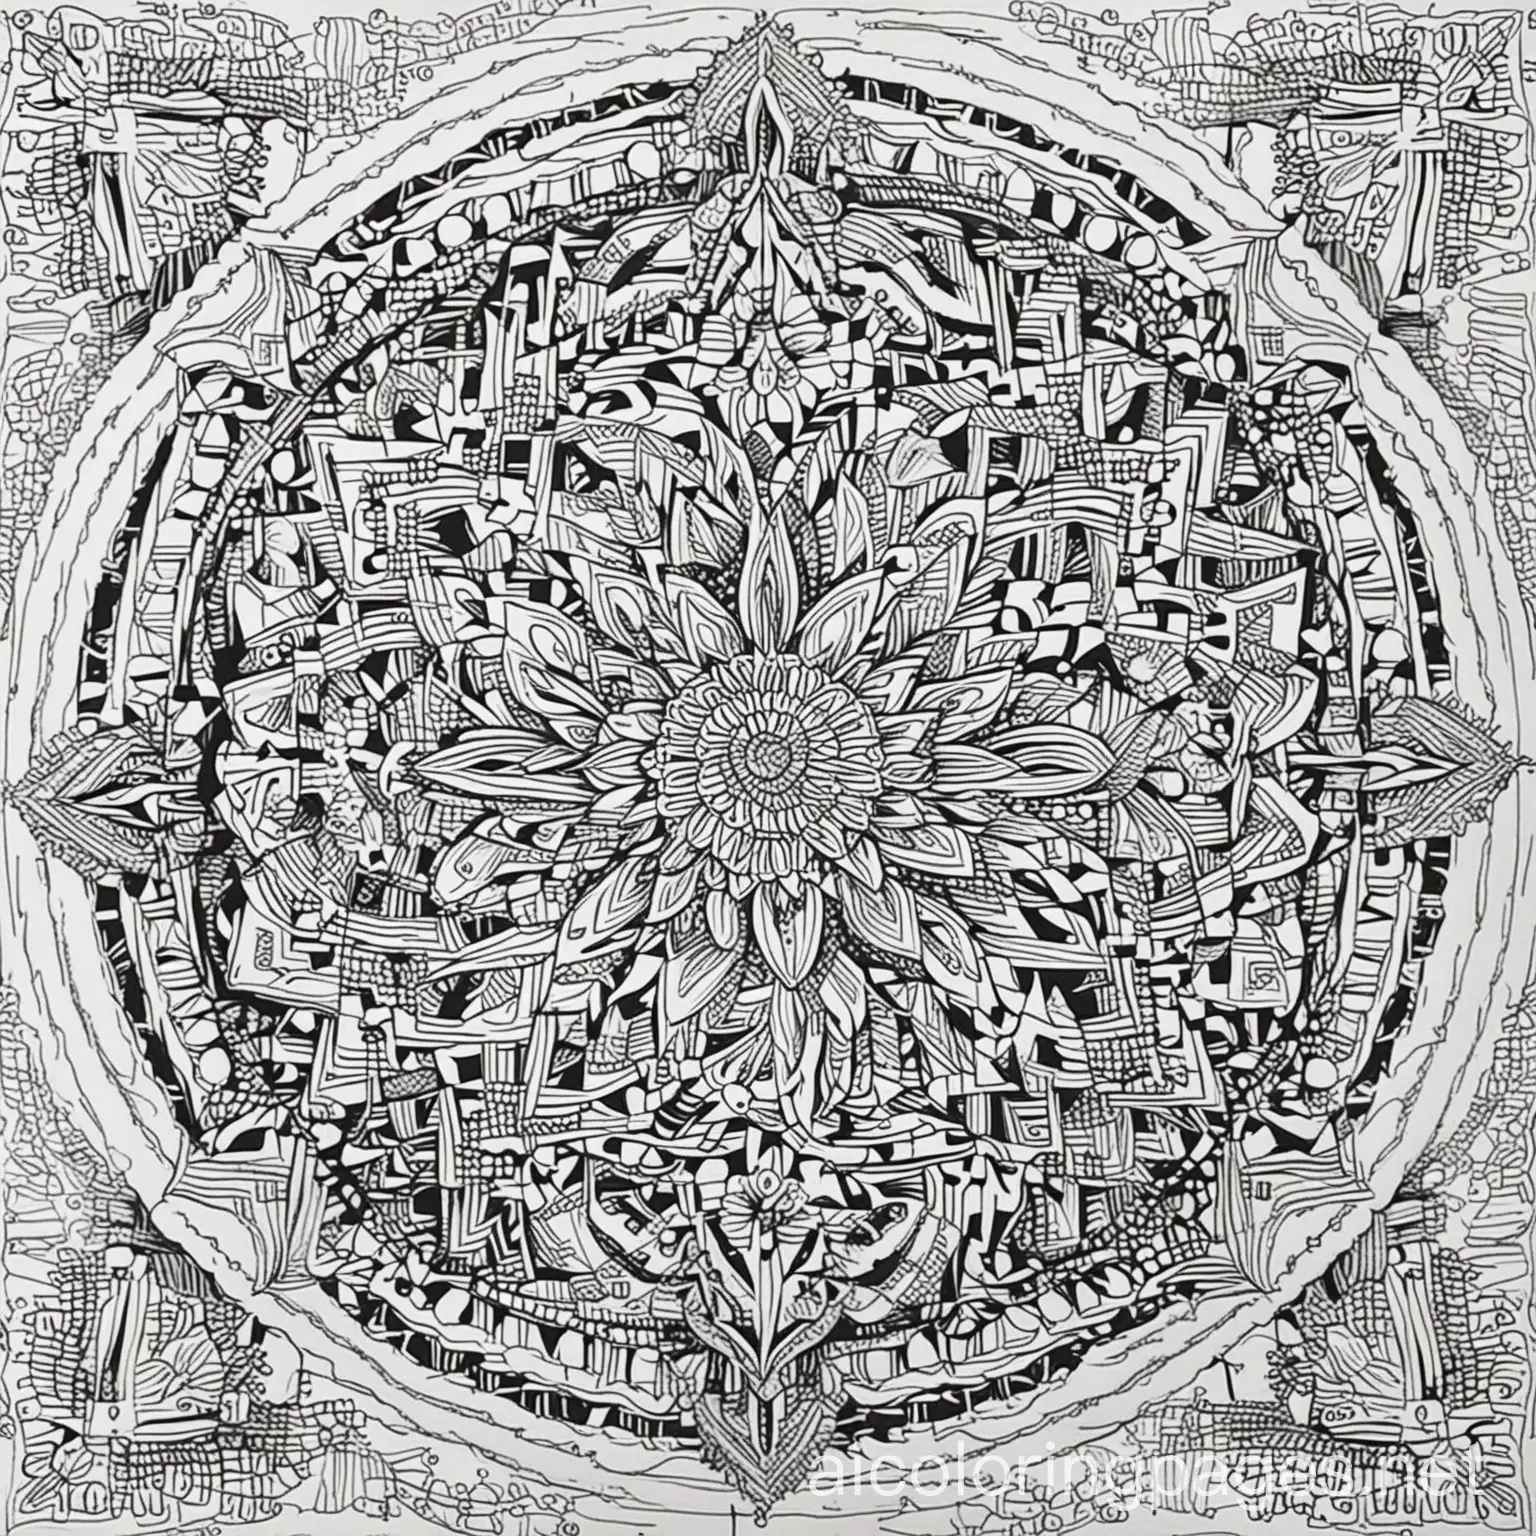 Intricate-Mandala-Coloring-Page-with-Geometric-Shapes-and-Floral-Elements